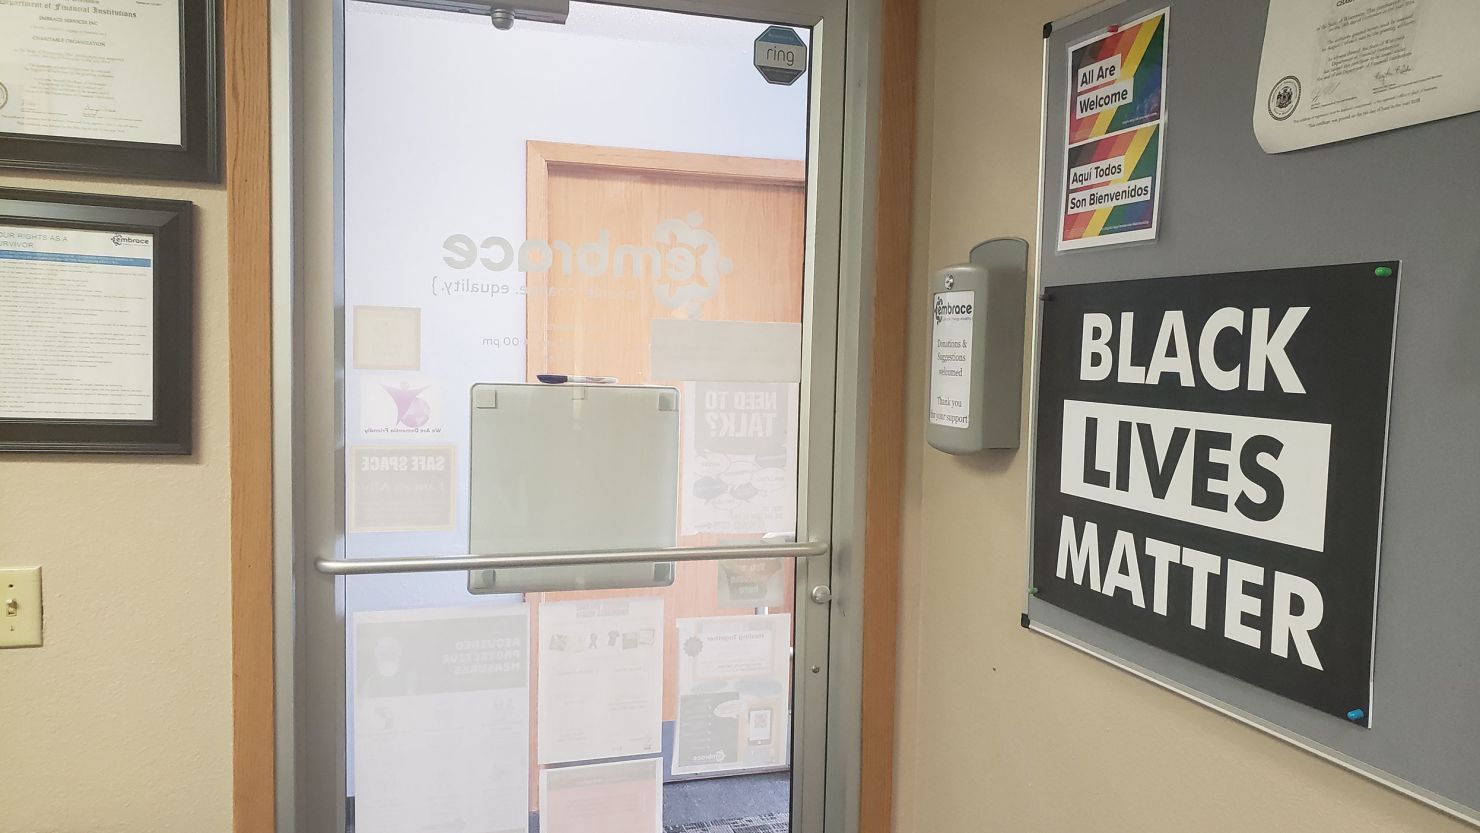 A Black Lives Matter sign is seen inside an Embrace office. More than a dozen law enforcement departments have cut ties with the organization after the signs went up.